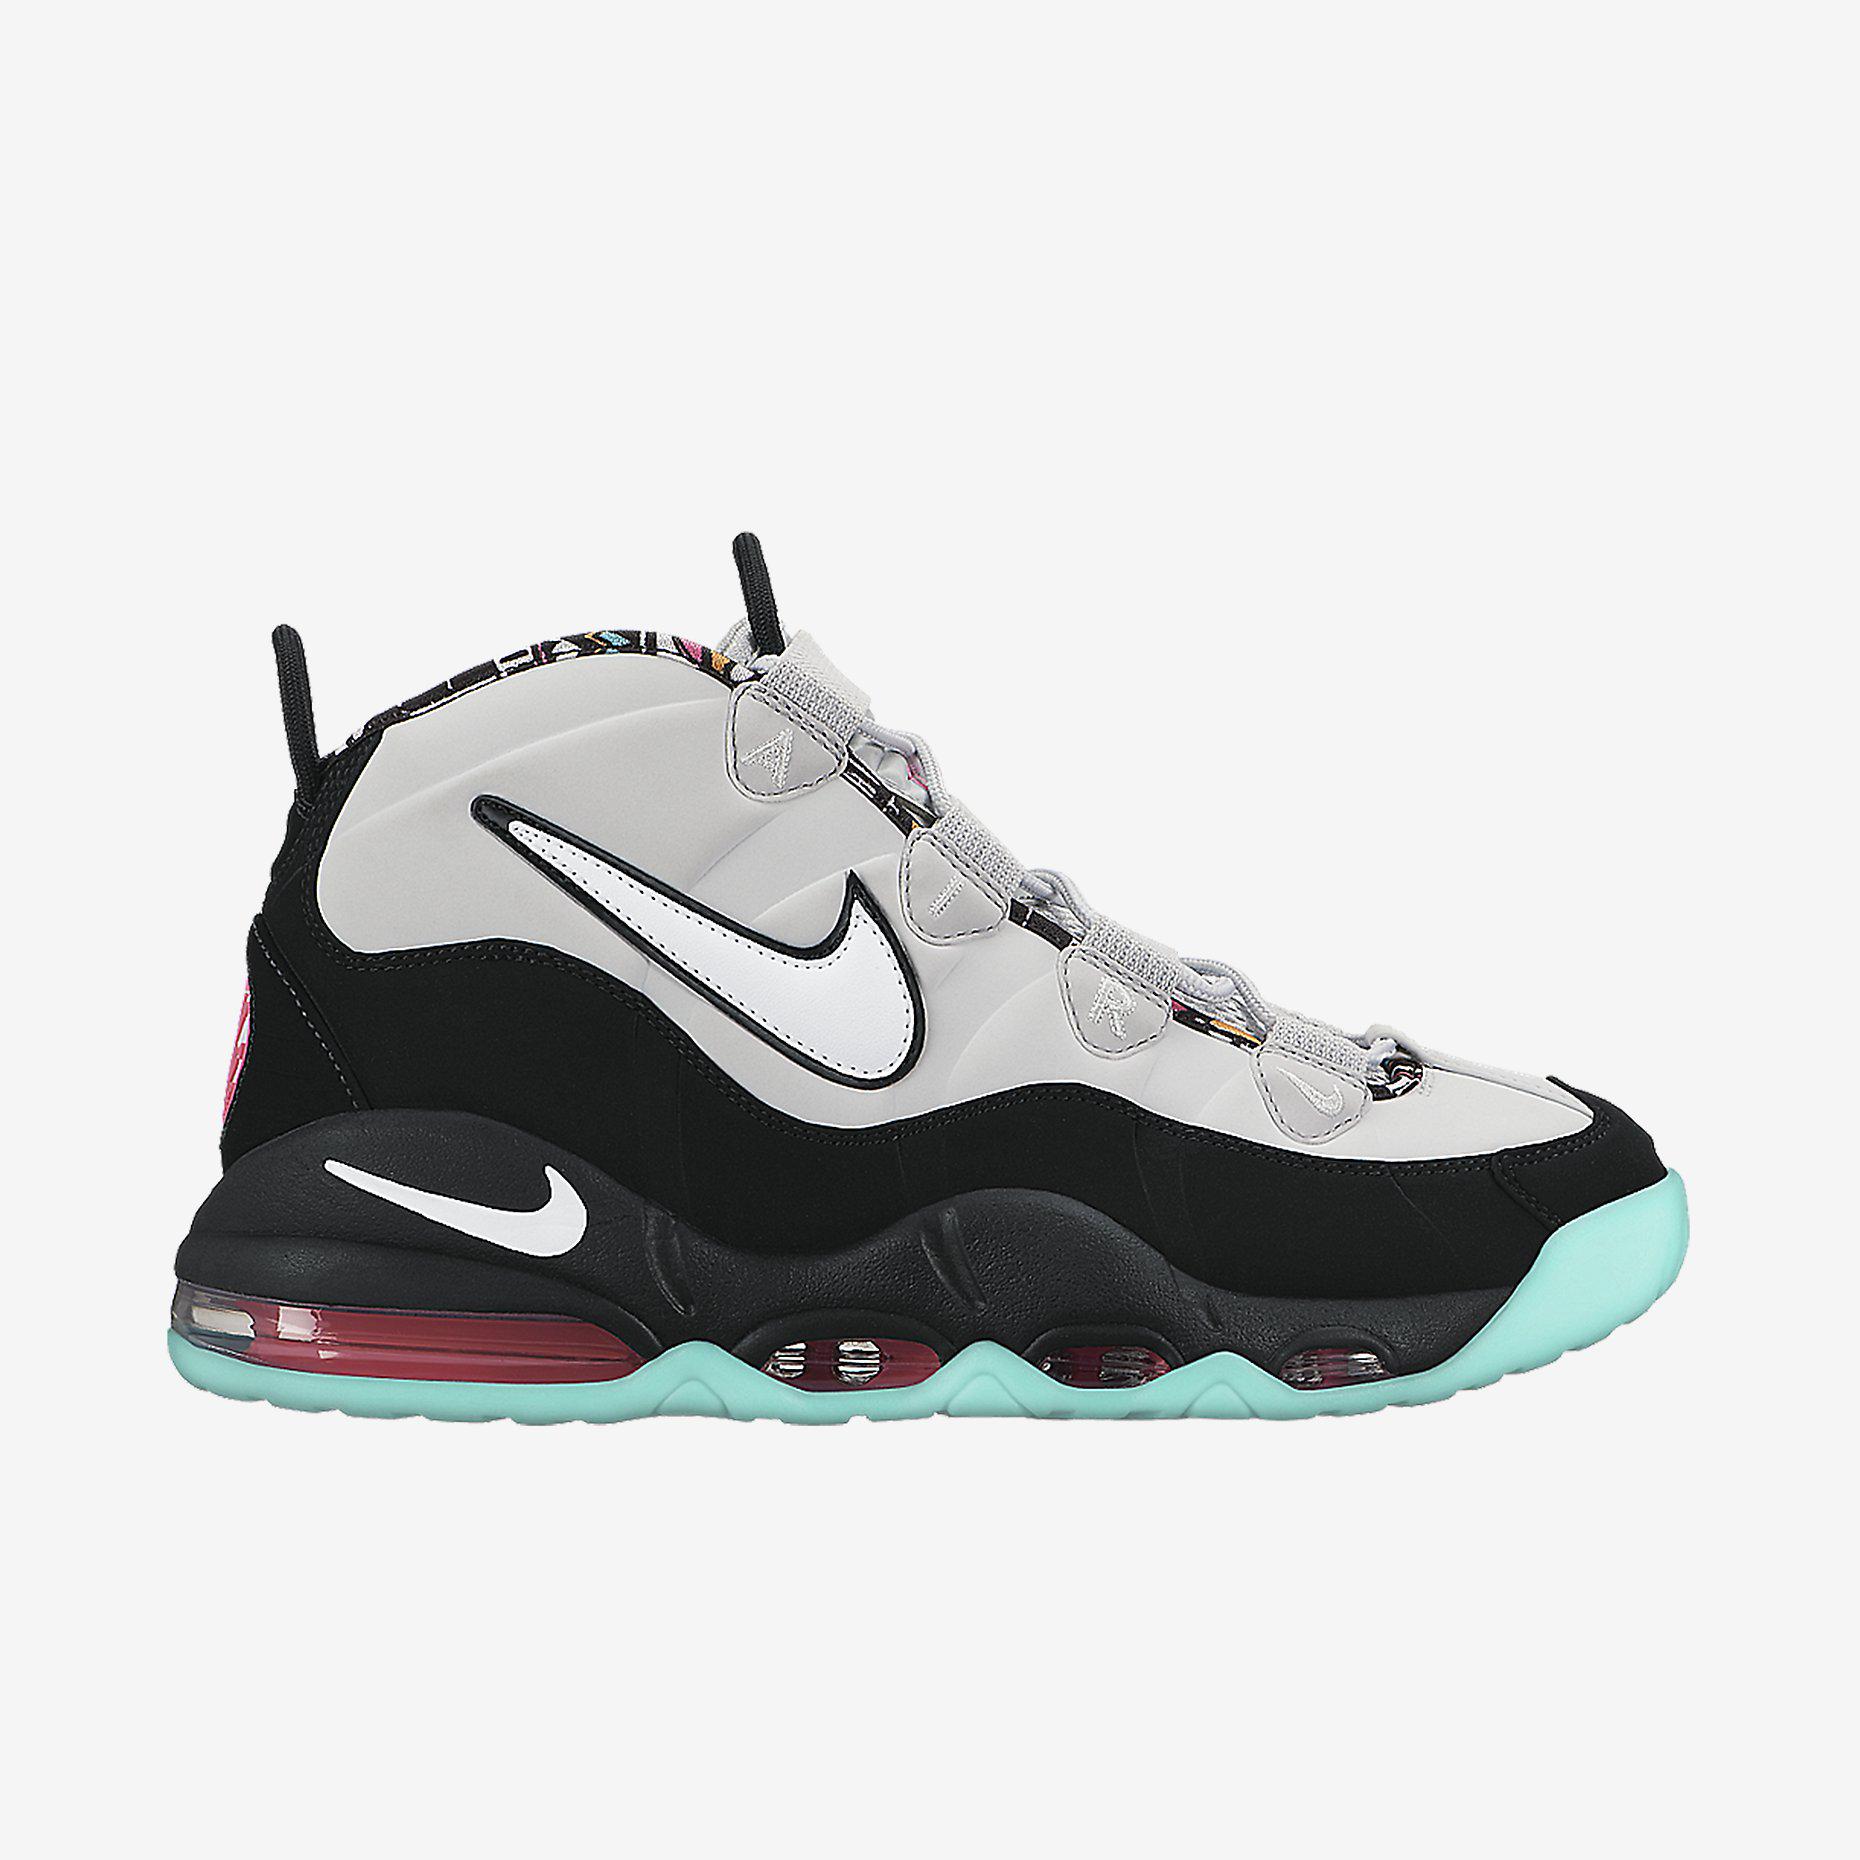 Literatura George Stevenson Víctor DTLR on Twitter: "New Arrival: Nike Air Max Uptempo (Black/White-Light  Pink) http://t.co/4XI8GYGMBr http://t.co/IQpZNlPE06" / Twitter